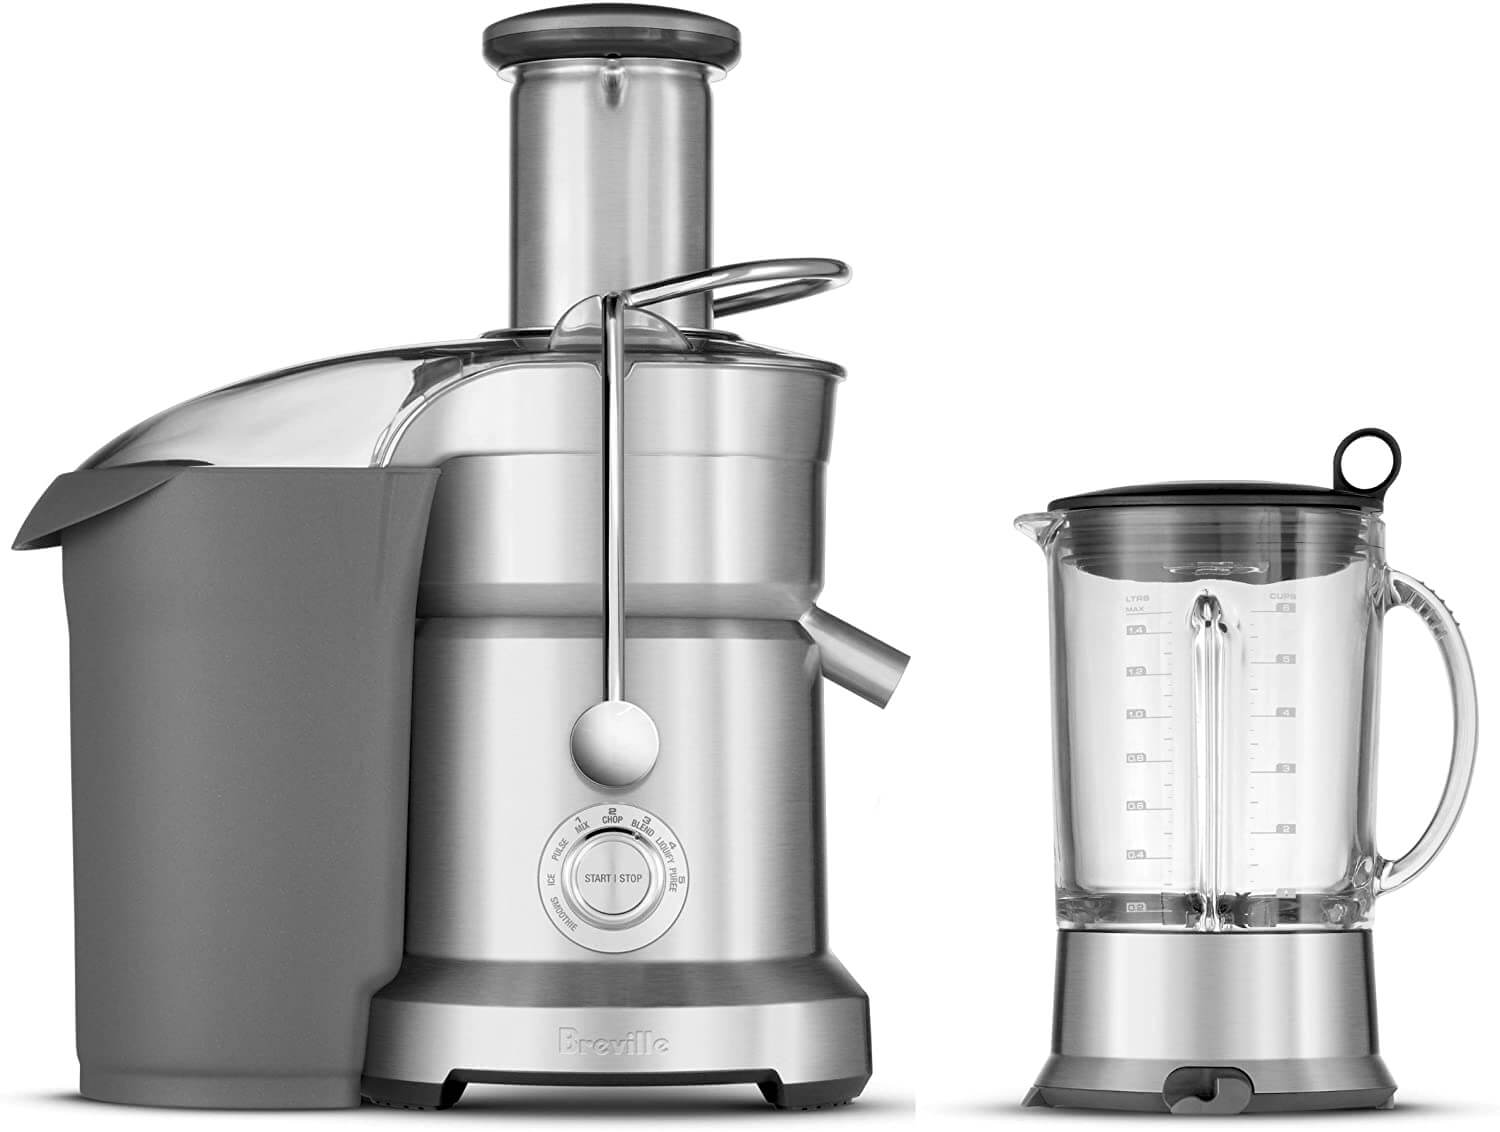  Cuisinart Compact Blender and Juicer Combo, One Size